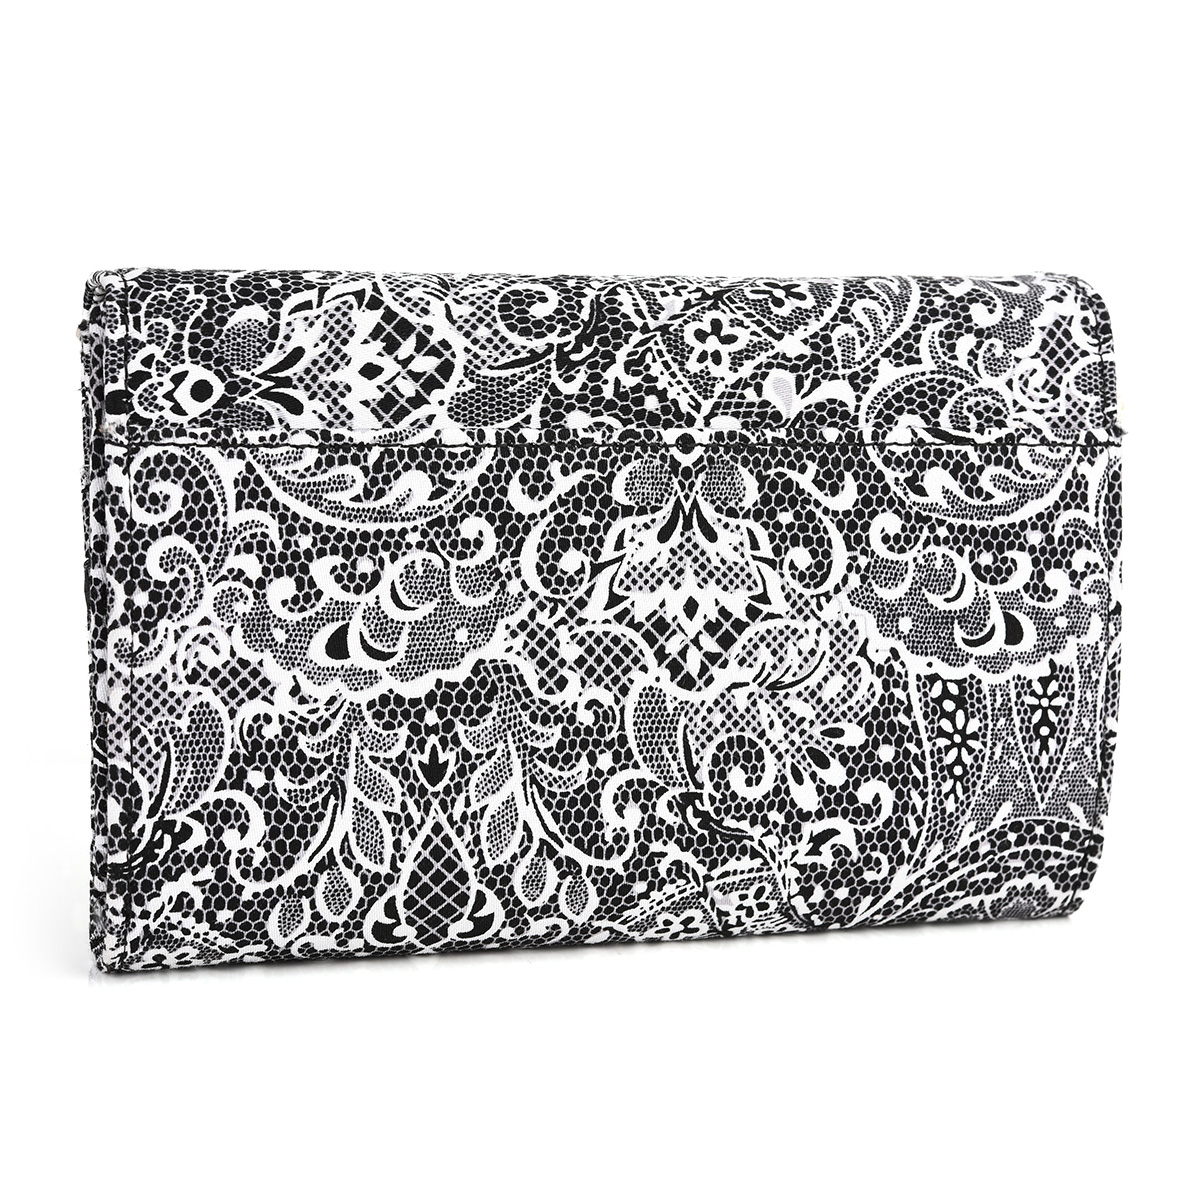 Timeless Black Paisley Weekender Crossbody Bag For Samsung Galaxy Grand 2, Grand Neo, GALAXY GRAND Prime, Grand Max | Phone Cases and Covers - image 4 of 7